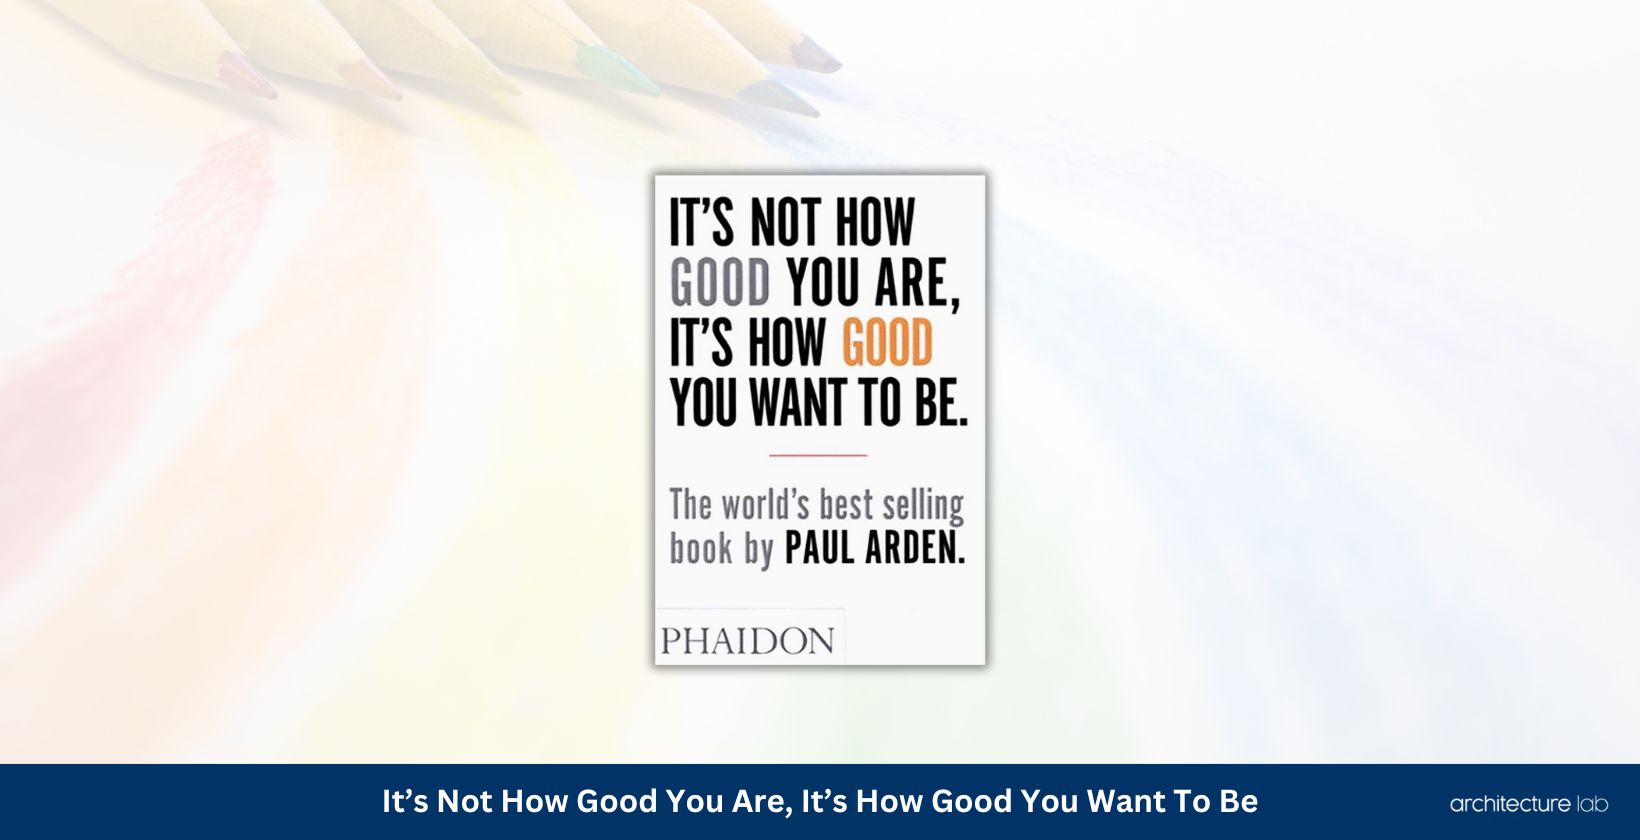 Its not how good you are its how good you want to be